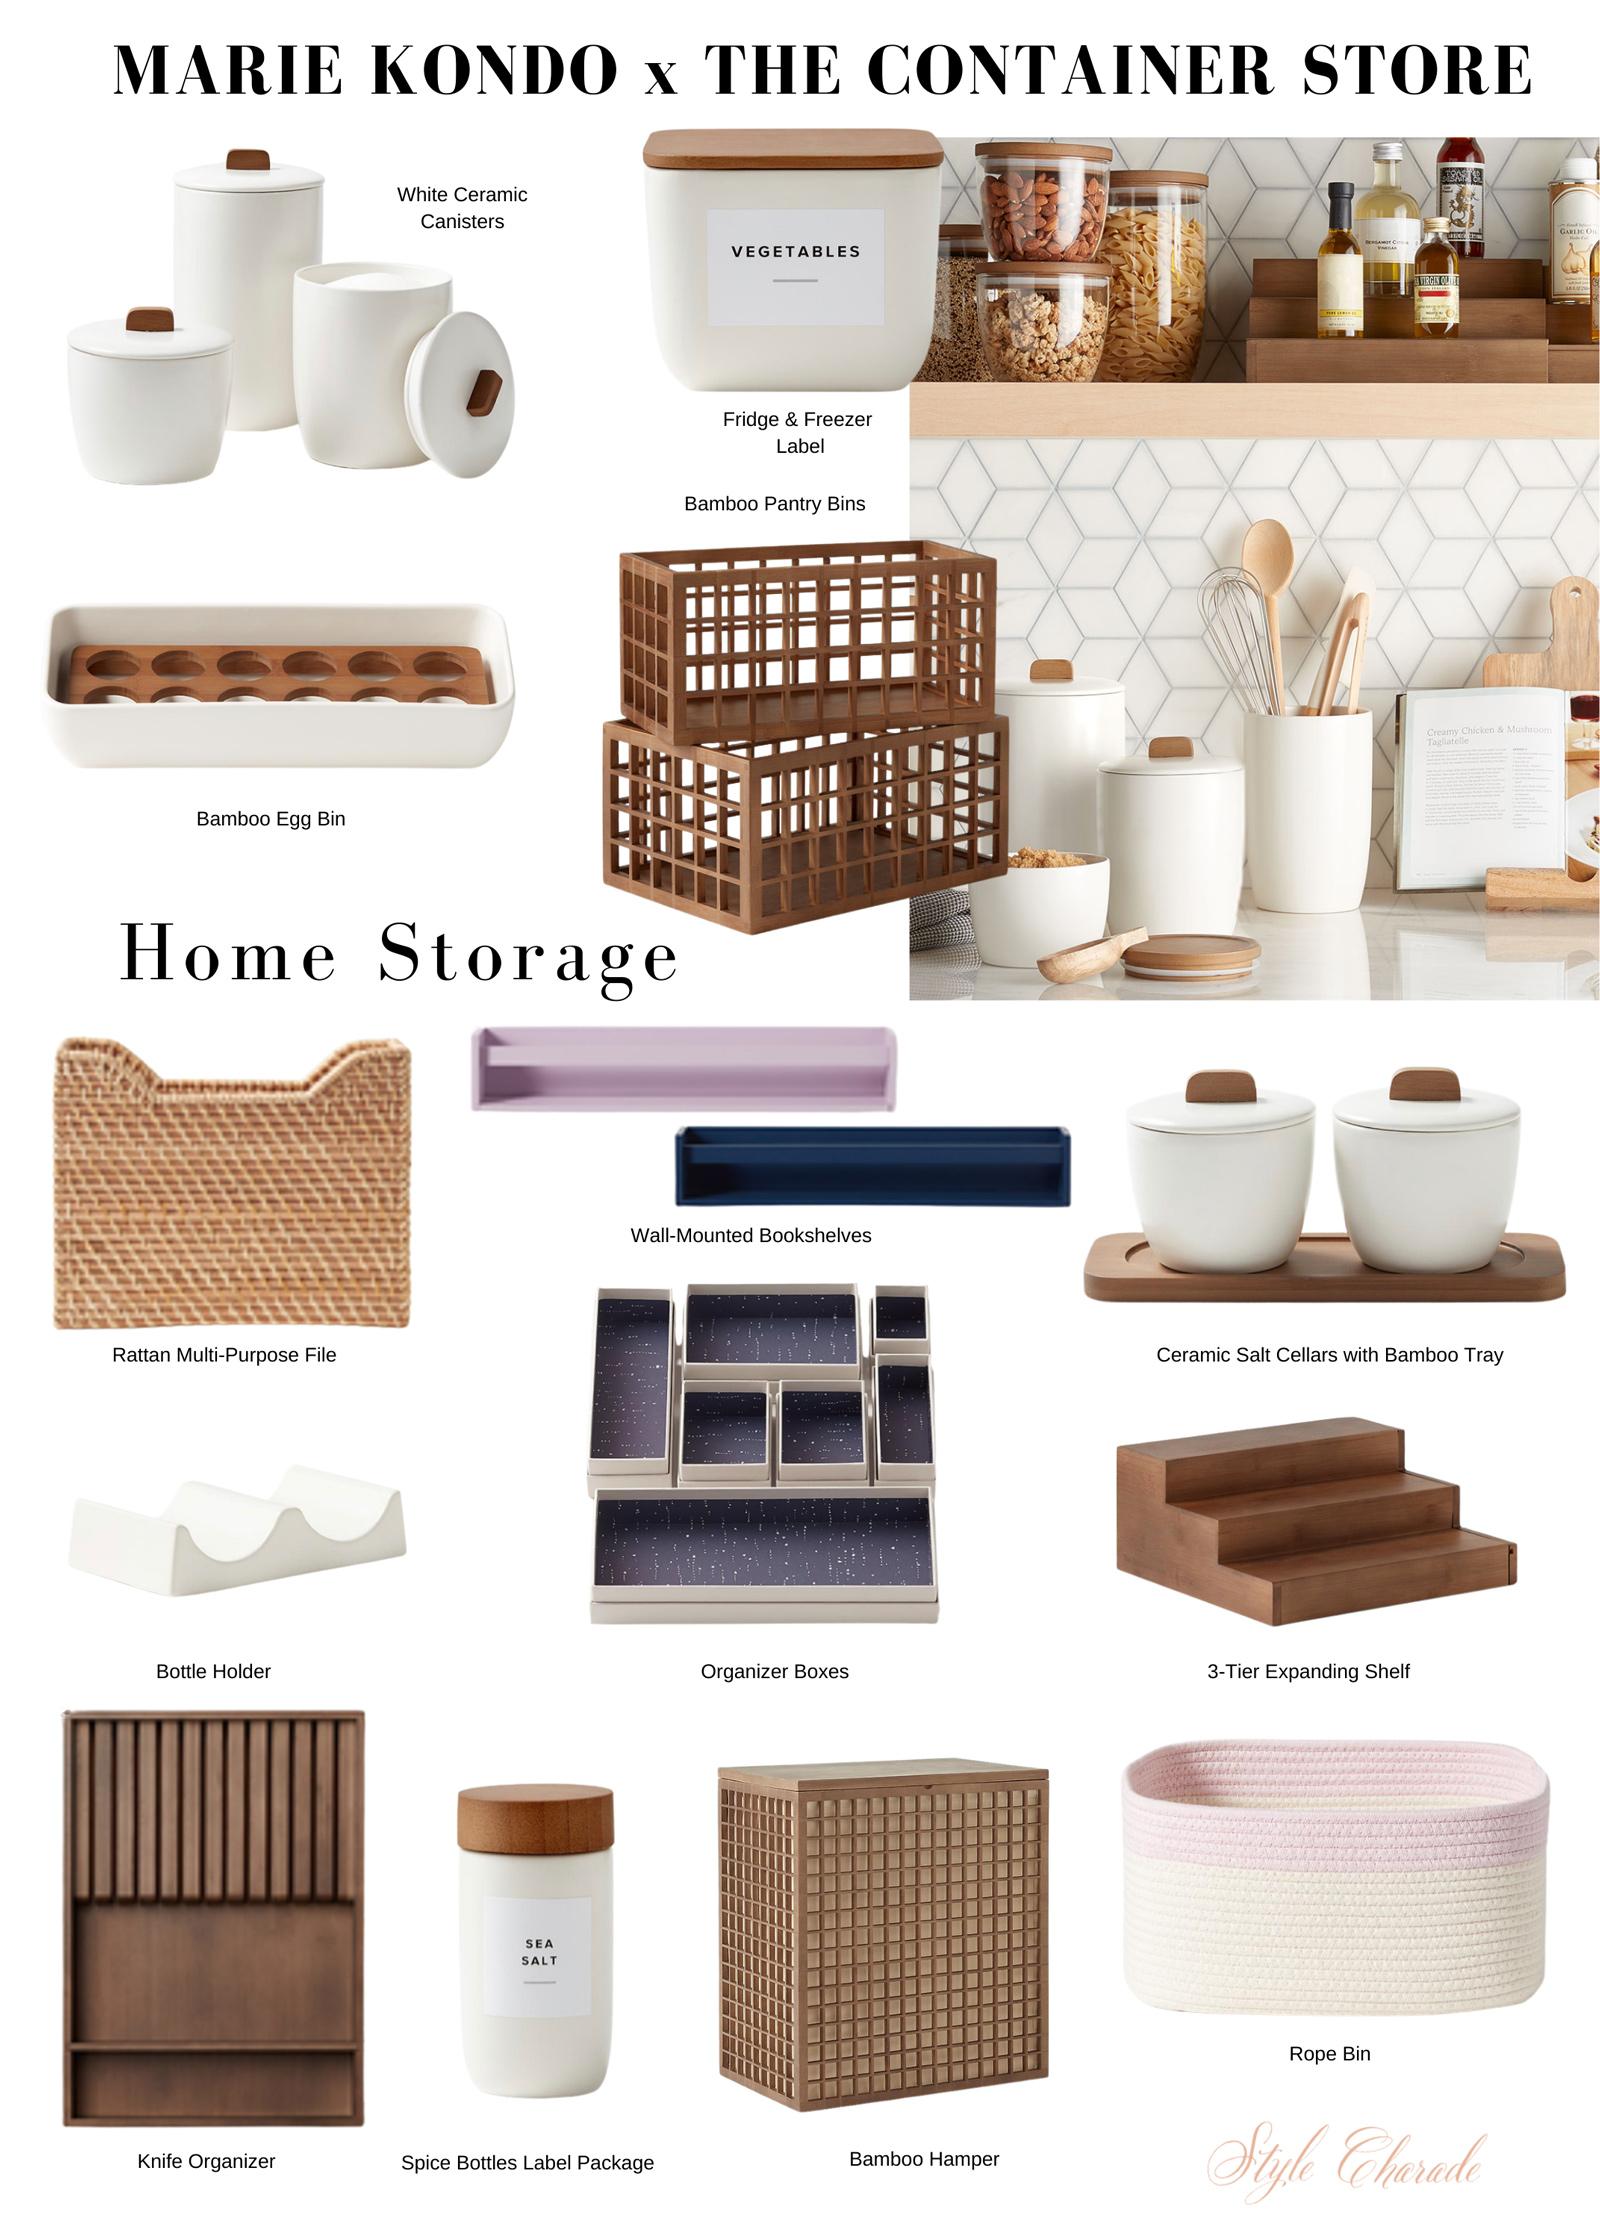 https://www.stylecharade.com/wp-content/uploads/2021/01/marie-kondo-container-store-collection-final.jpg